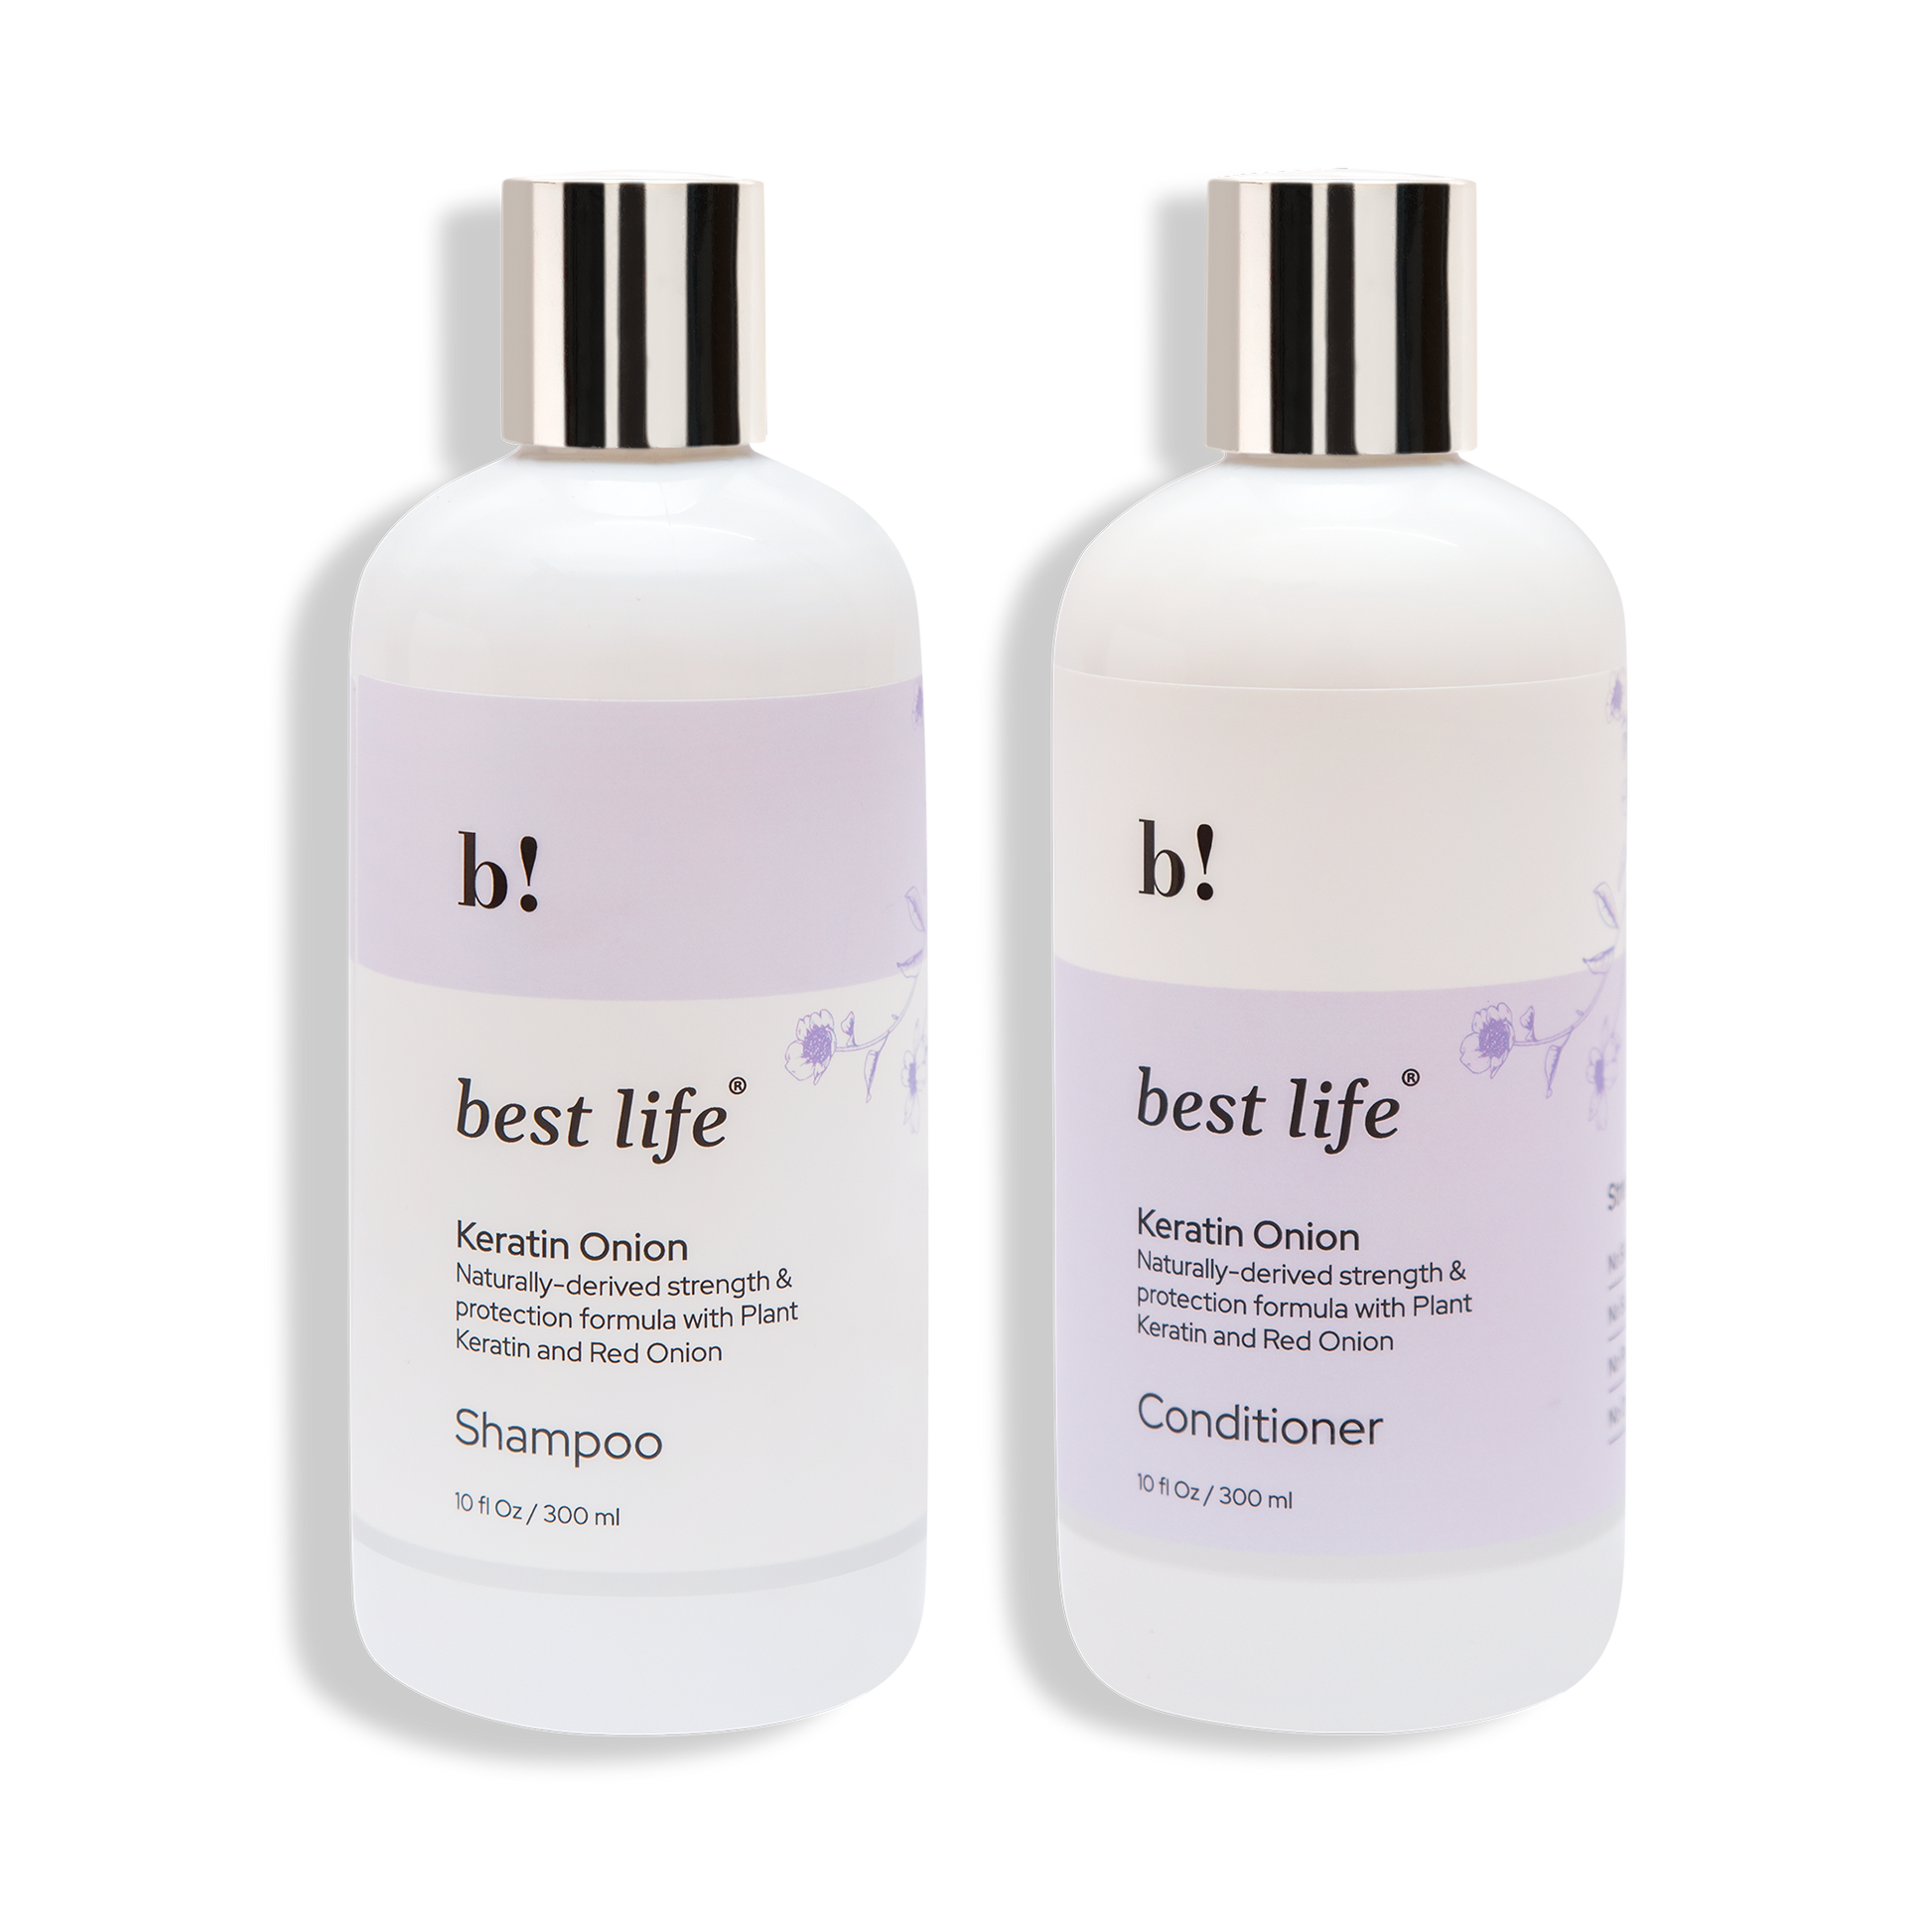 paraben free shampoo and conditioner